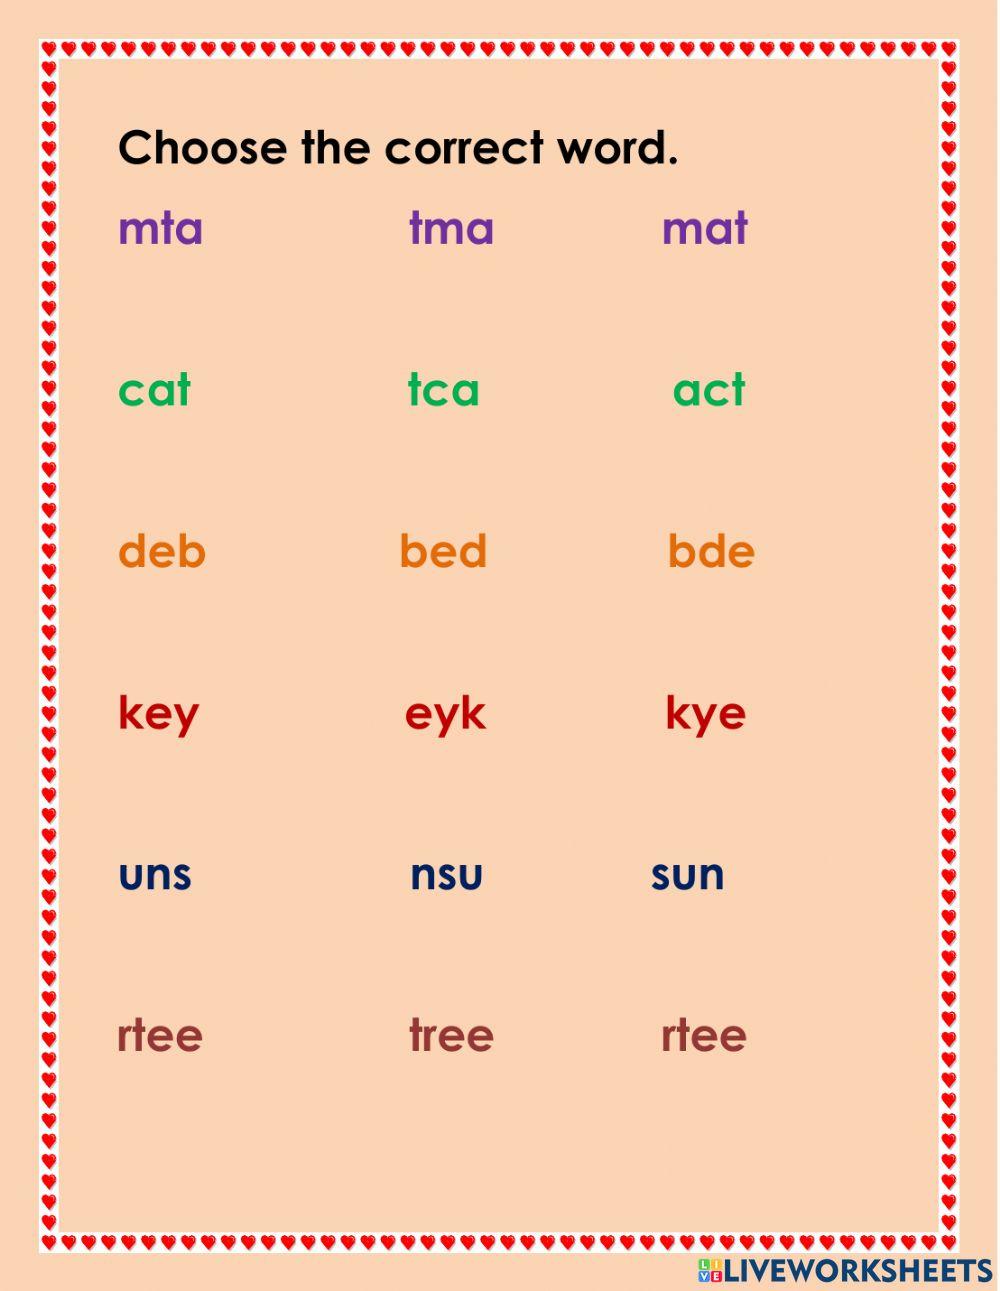 Choose the correct word.